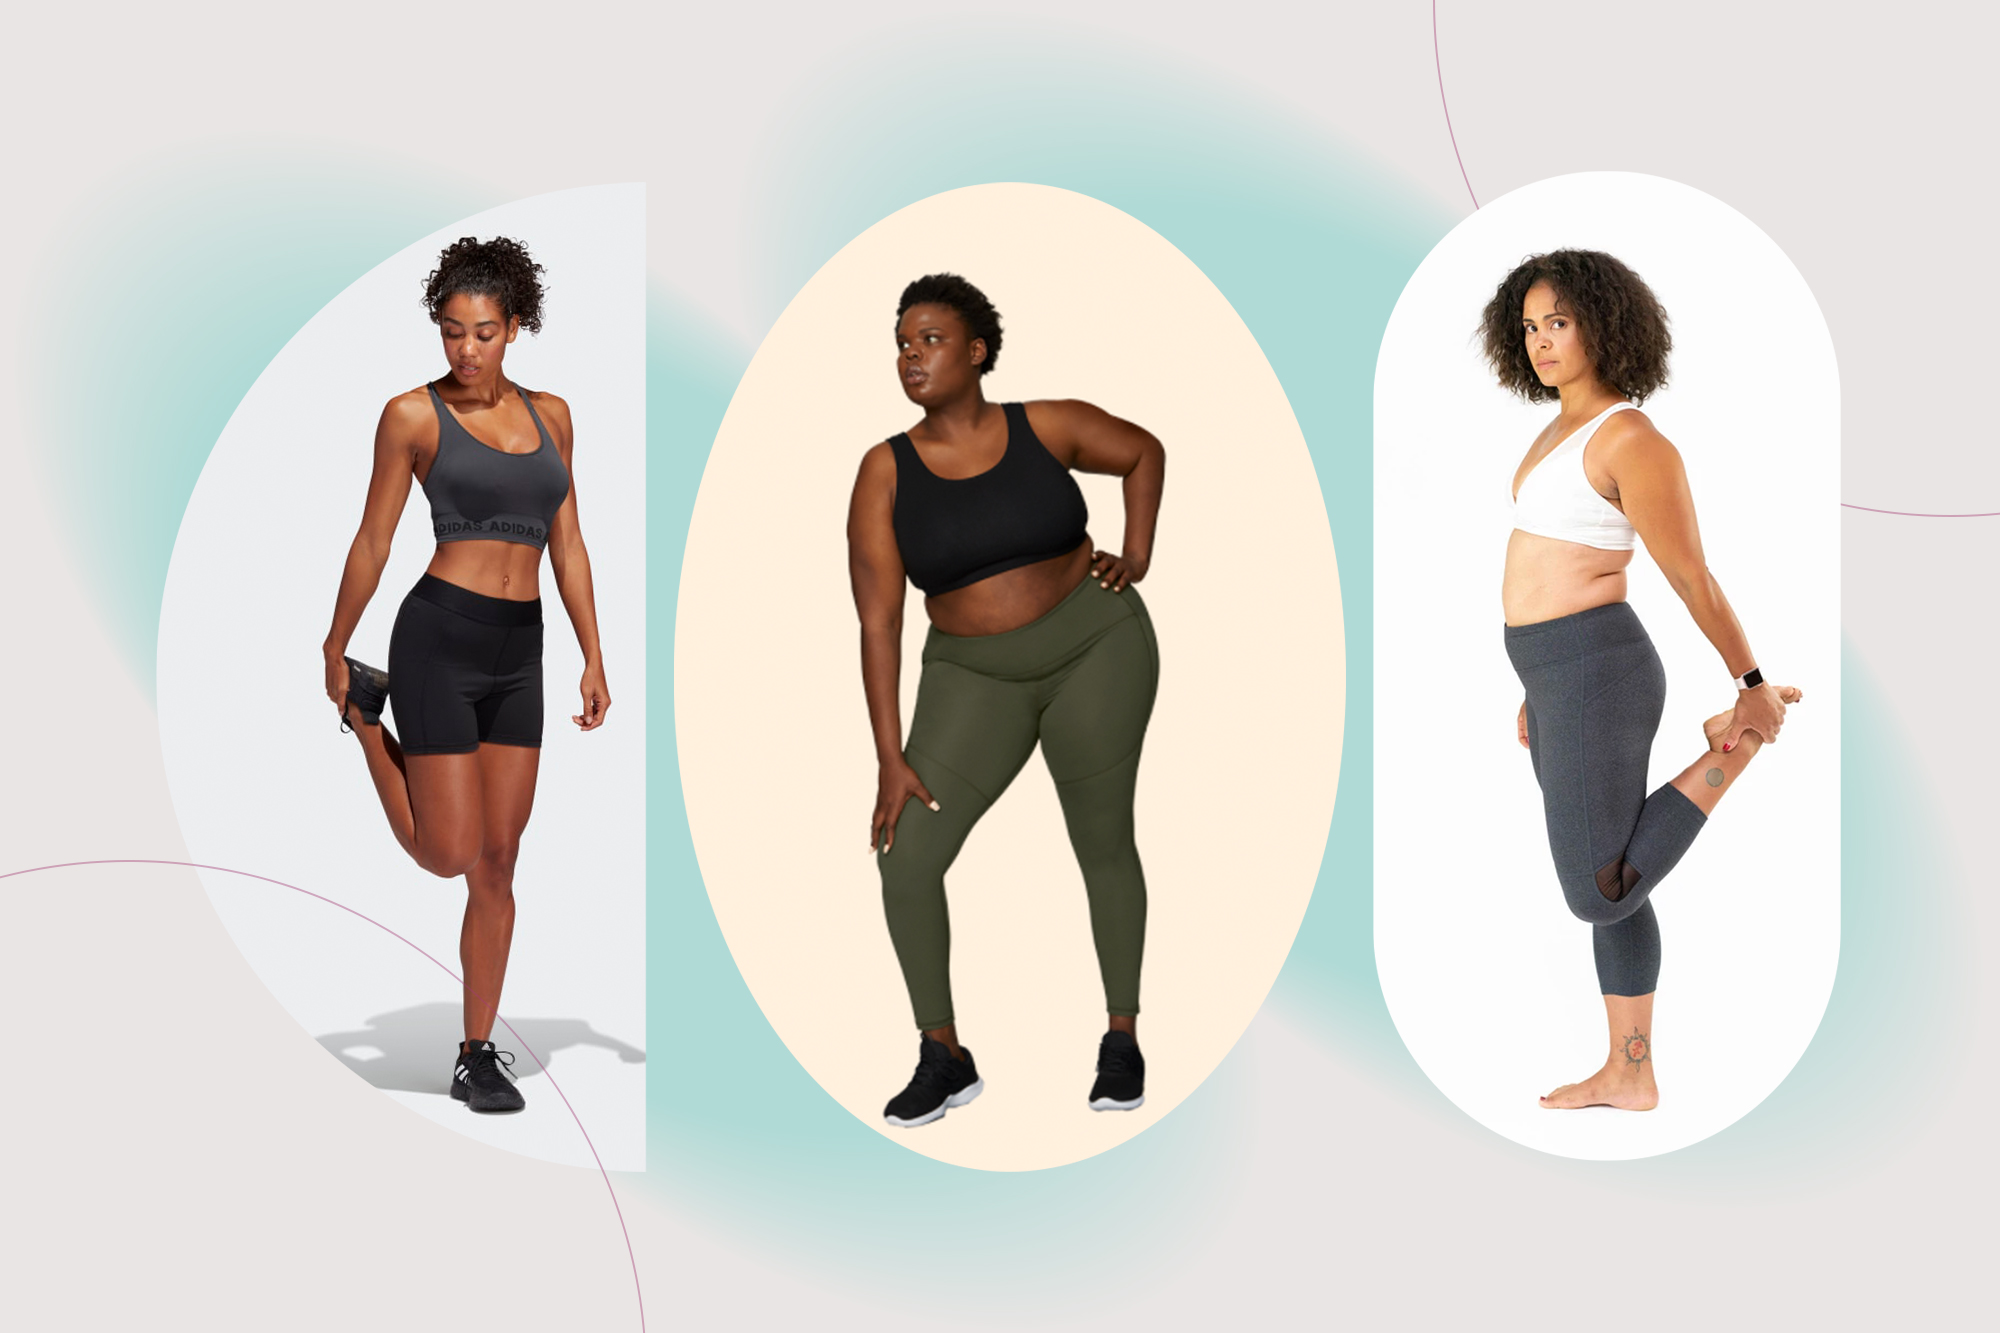 These Period-Friendly Workout Leggings Are Eco Friendly, Leak